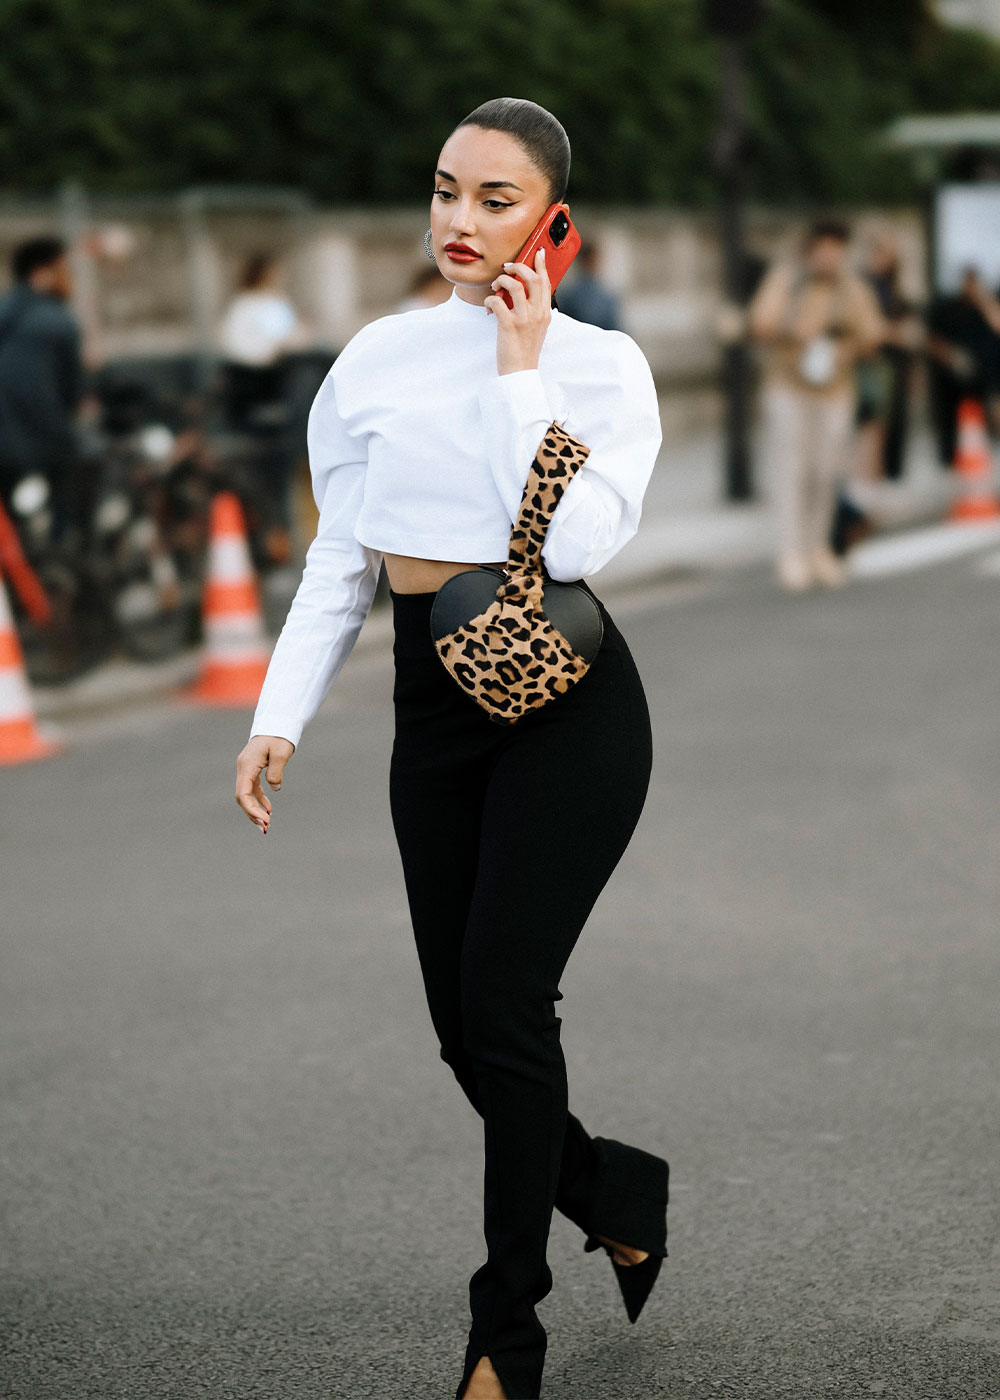 Street style: black and white